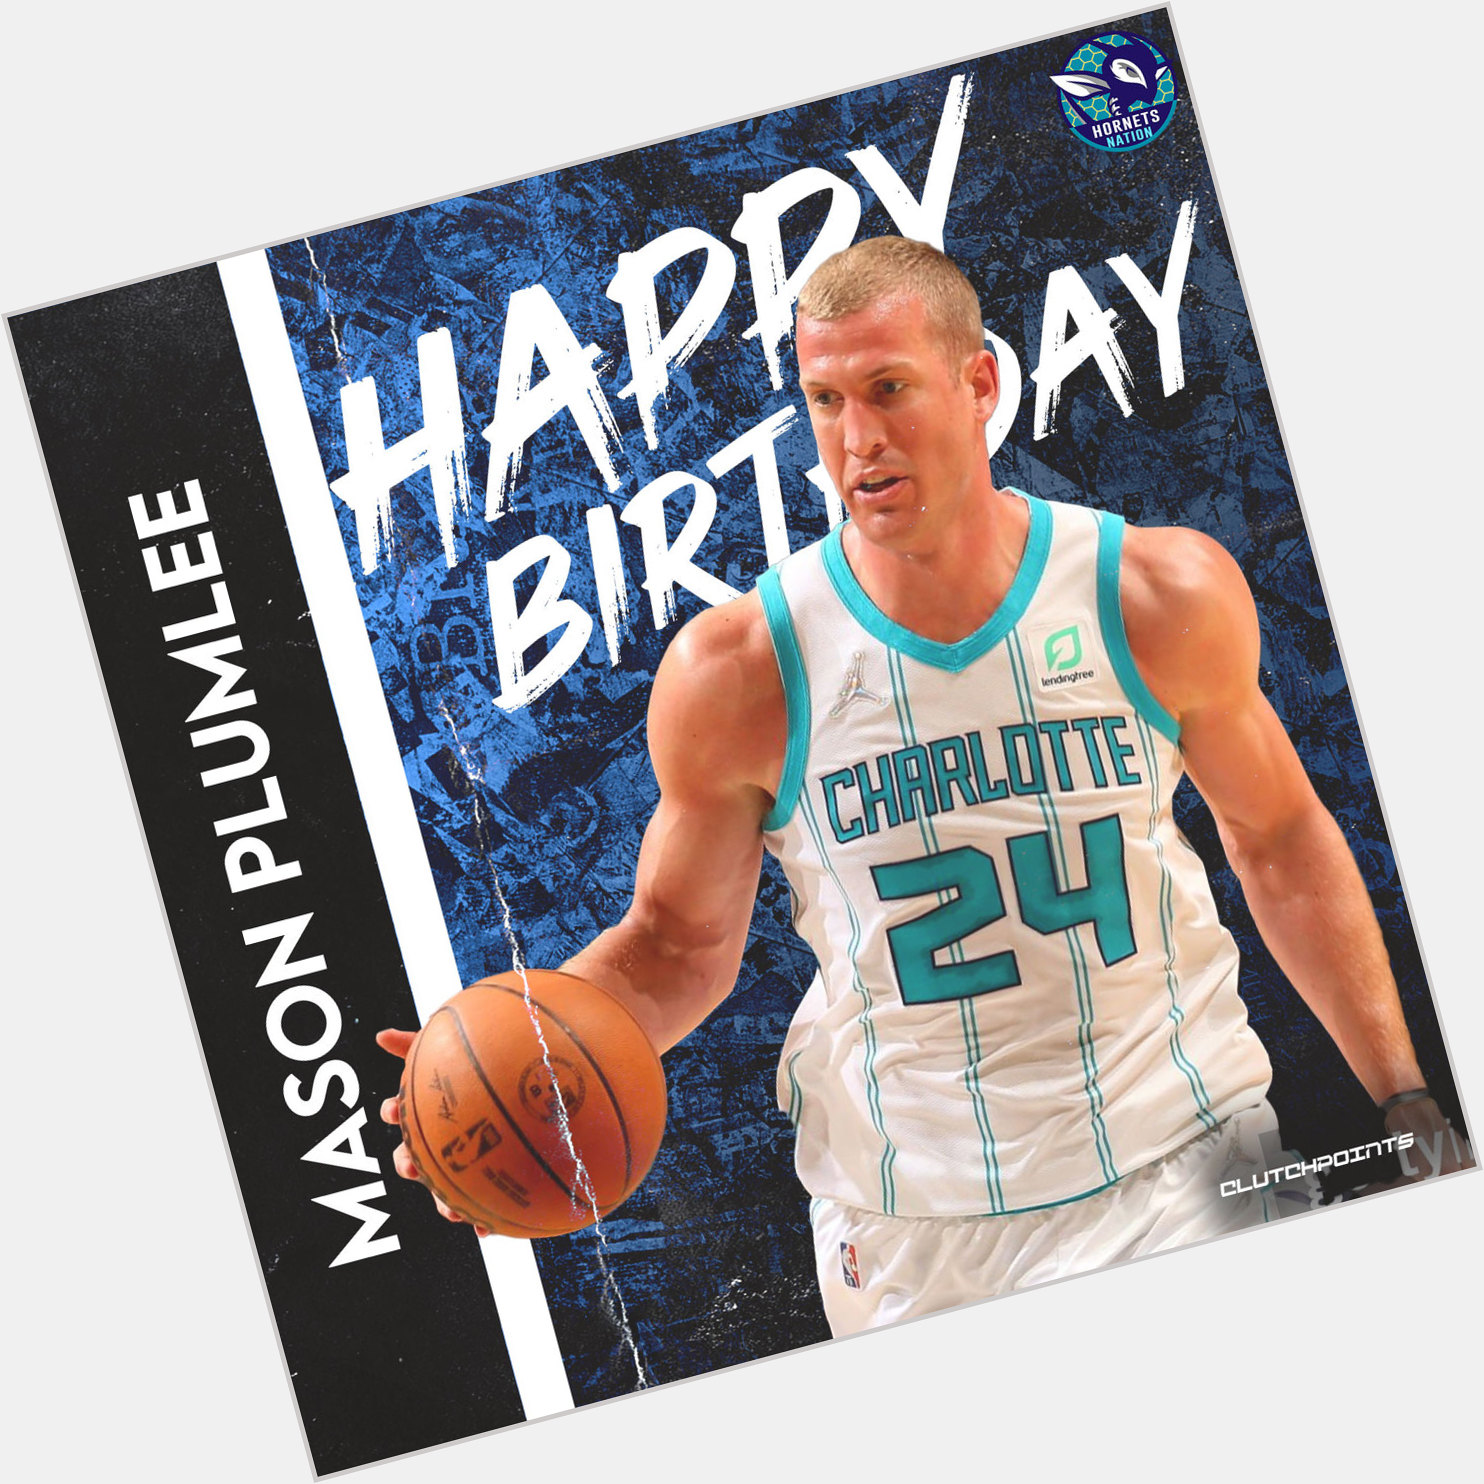 Join Hornets Nation as we greet Mason Plumlee a happy 32nd birthday! 